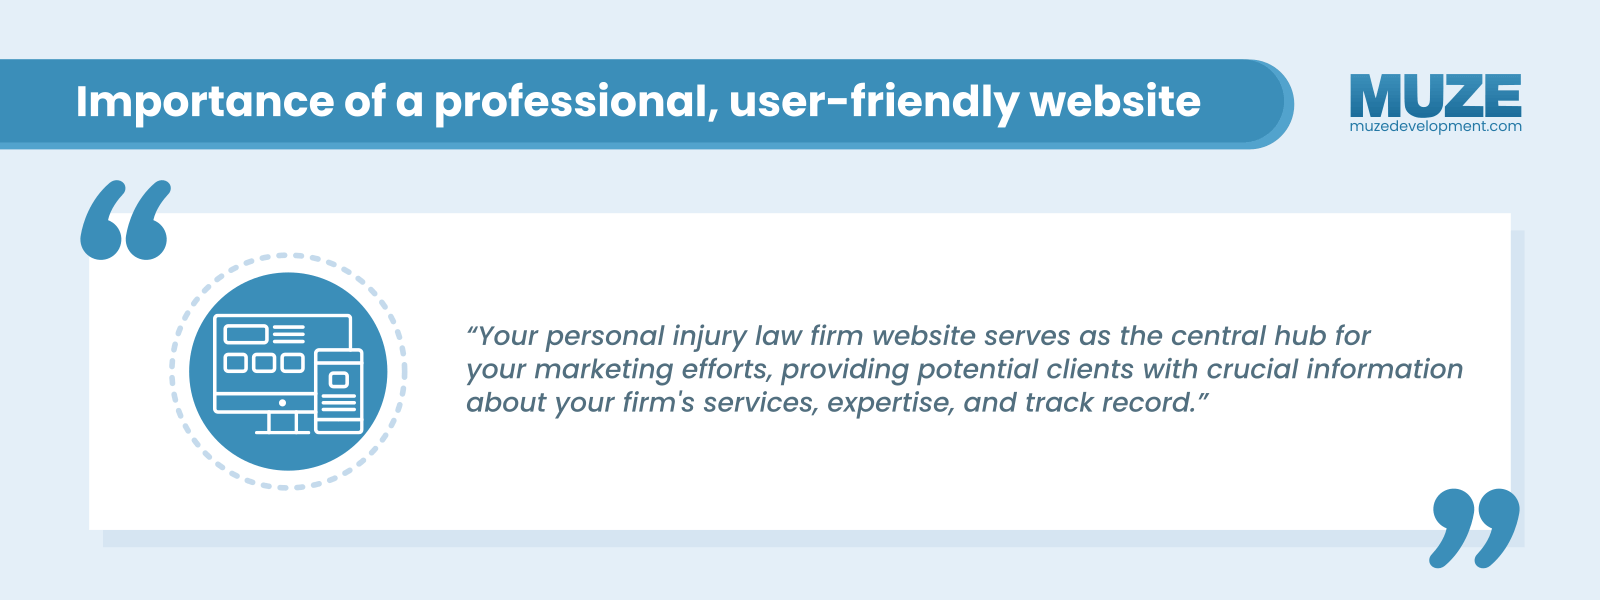 Importance of a professional, user-friendly website